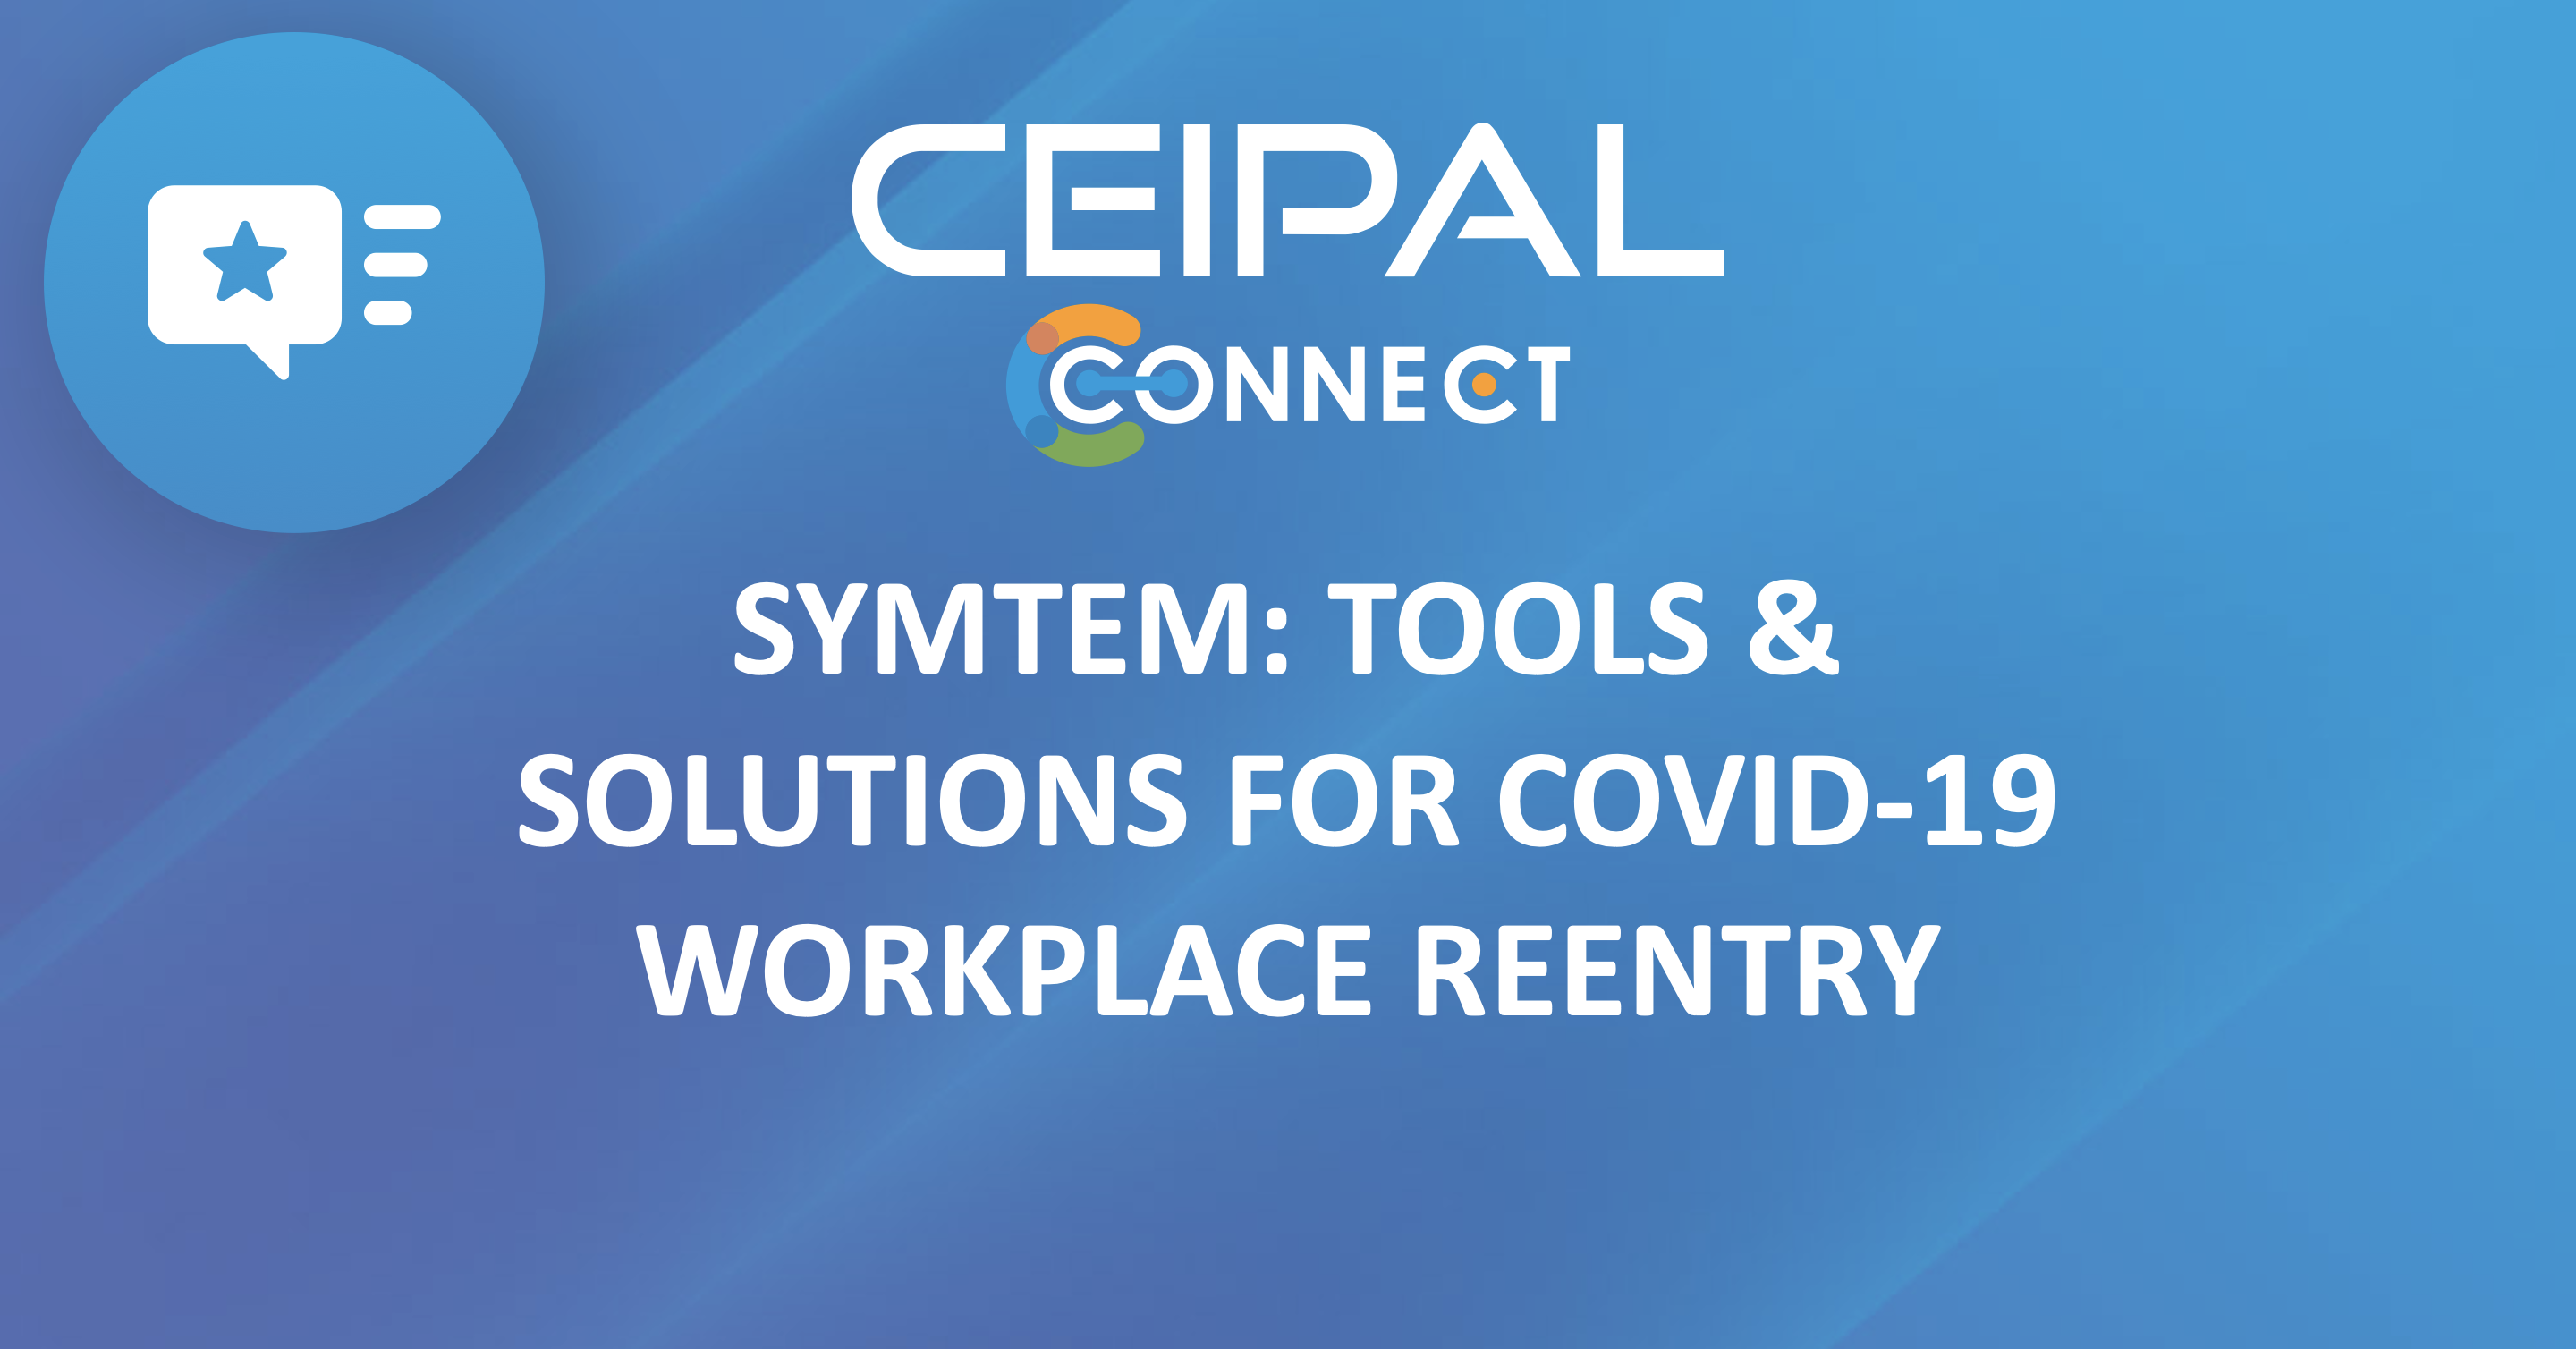 SymTem: Tools & Solutions for COVID-19 Workplace Reentry